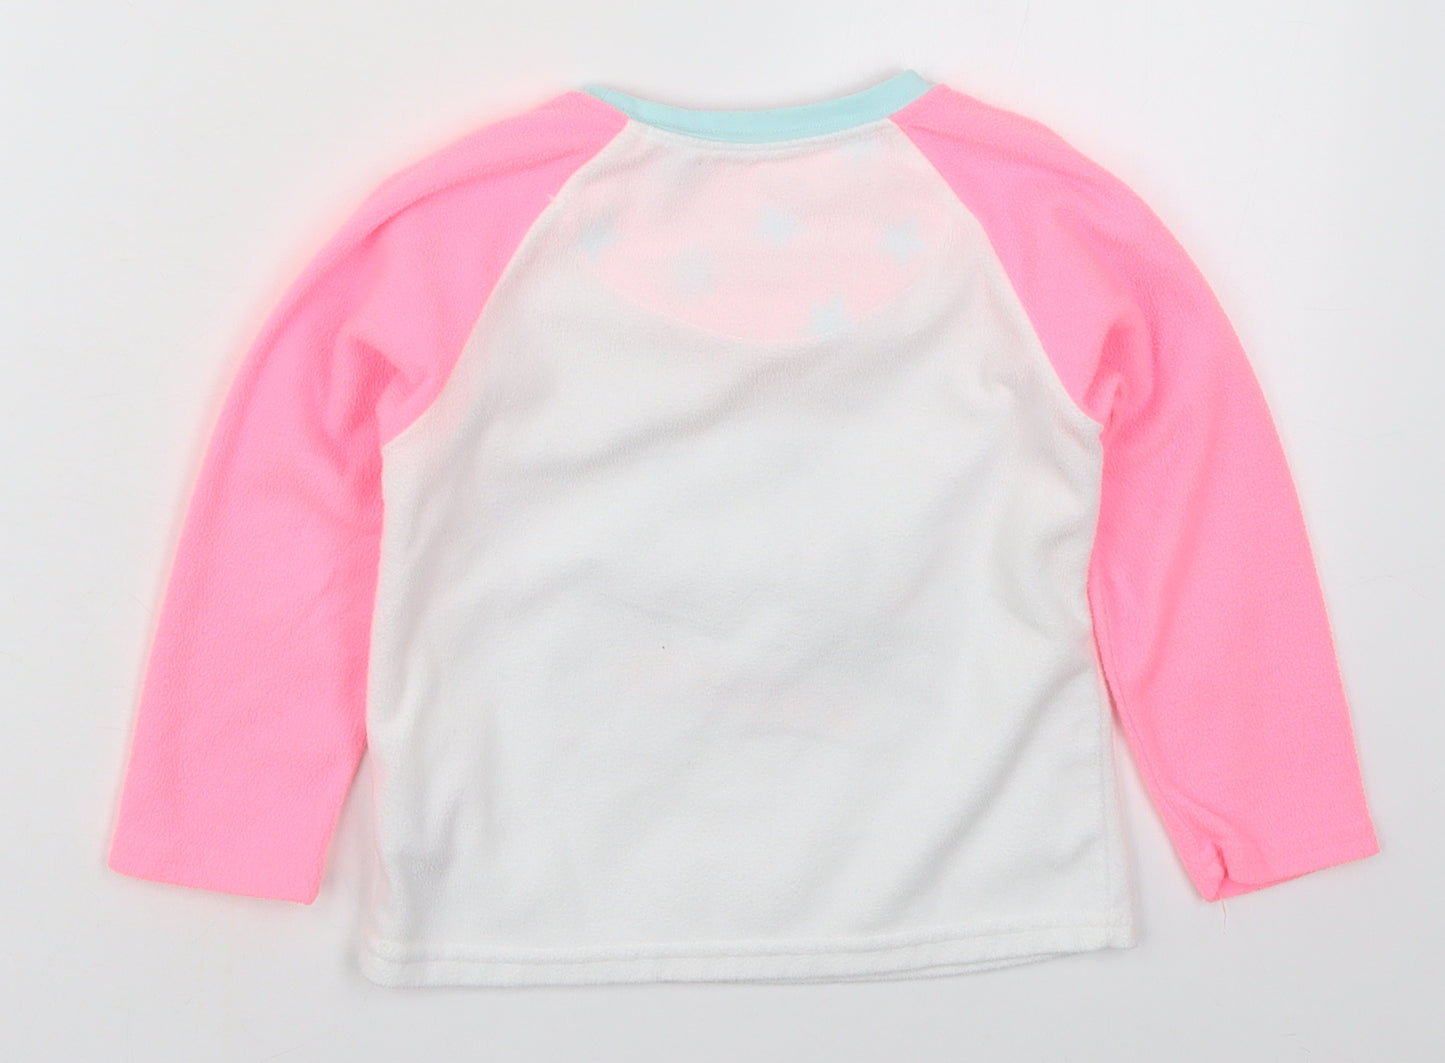 Primark Girls Pink Colourblock Polyester Top Pyjama Top Size 2-3 Years  Pullover - Magical Unicorn